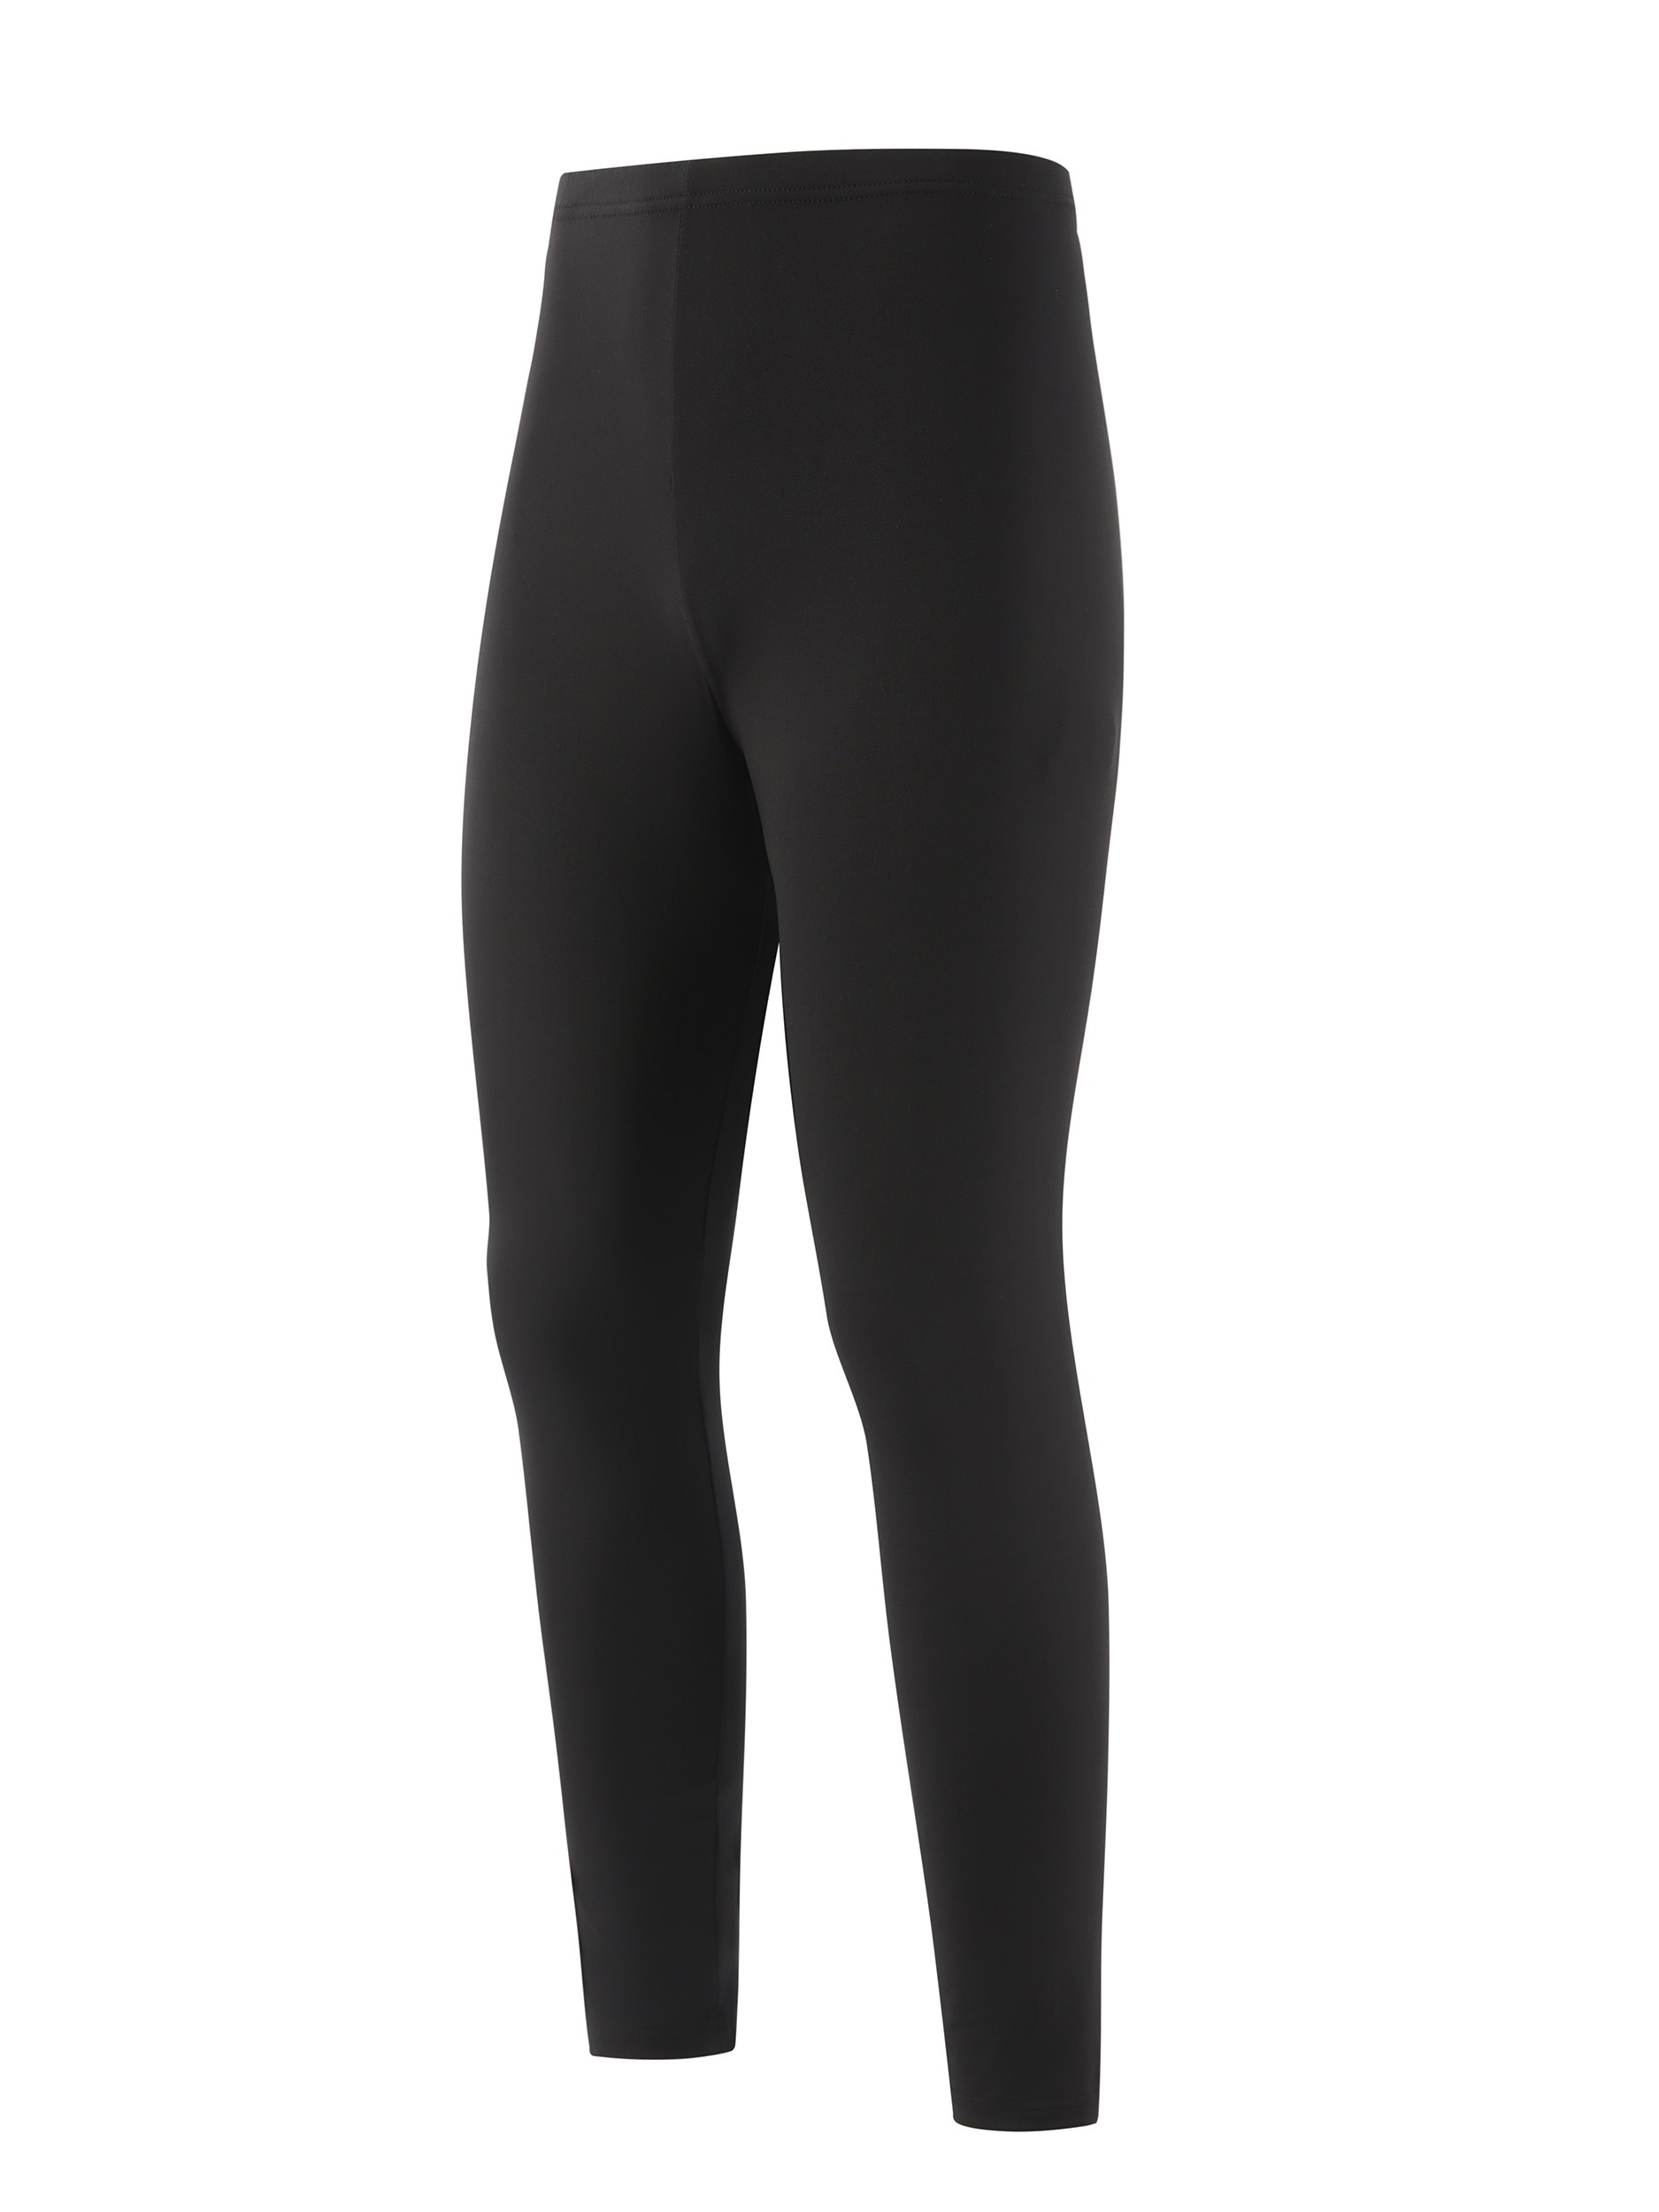 Warmest Leggings and Tights Base Layers